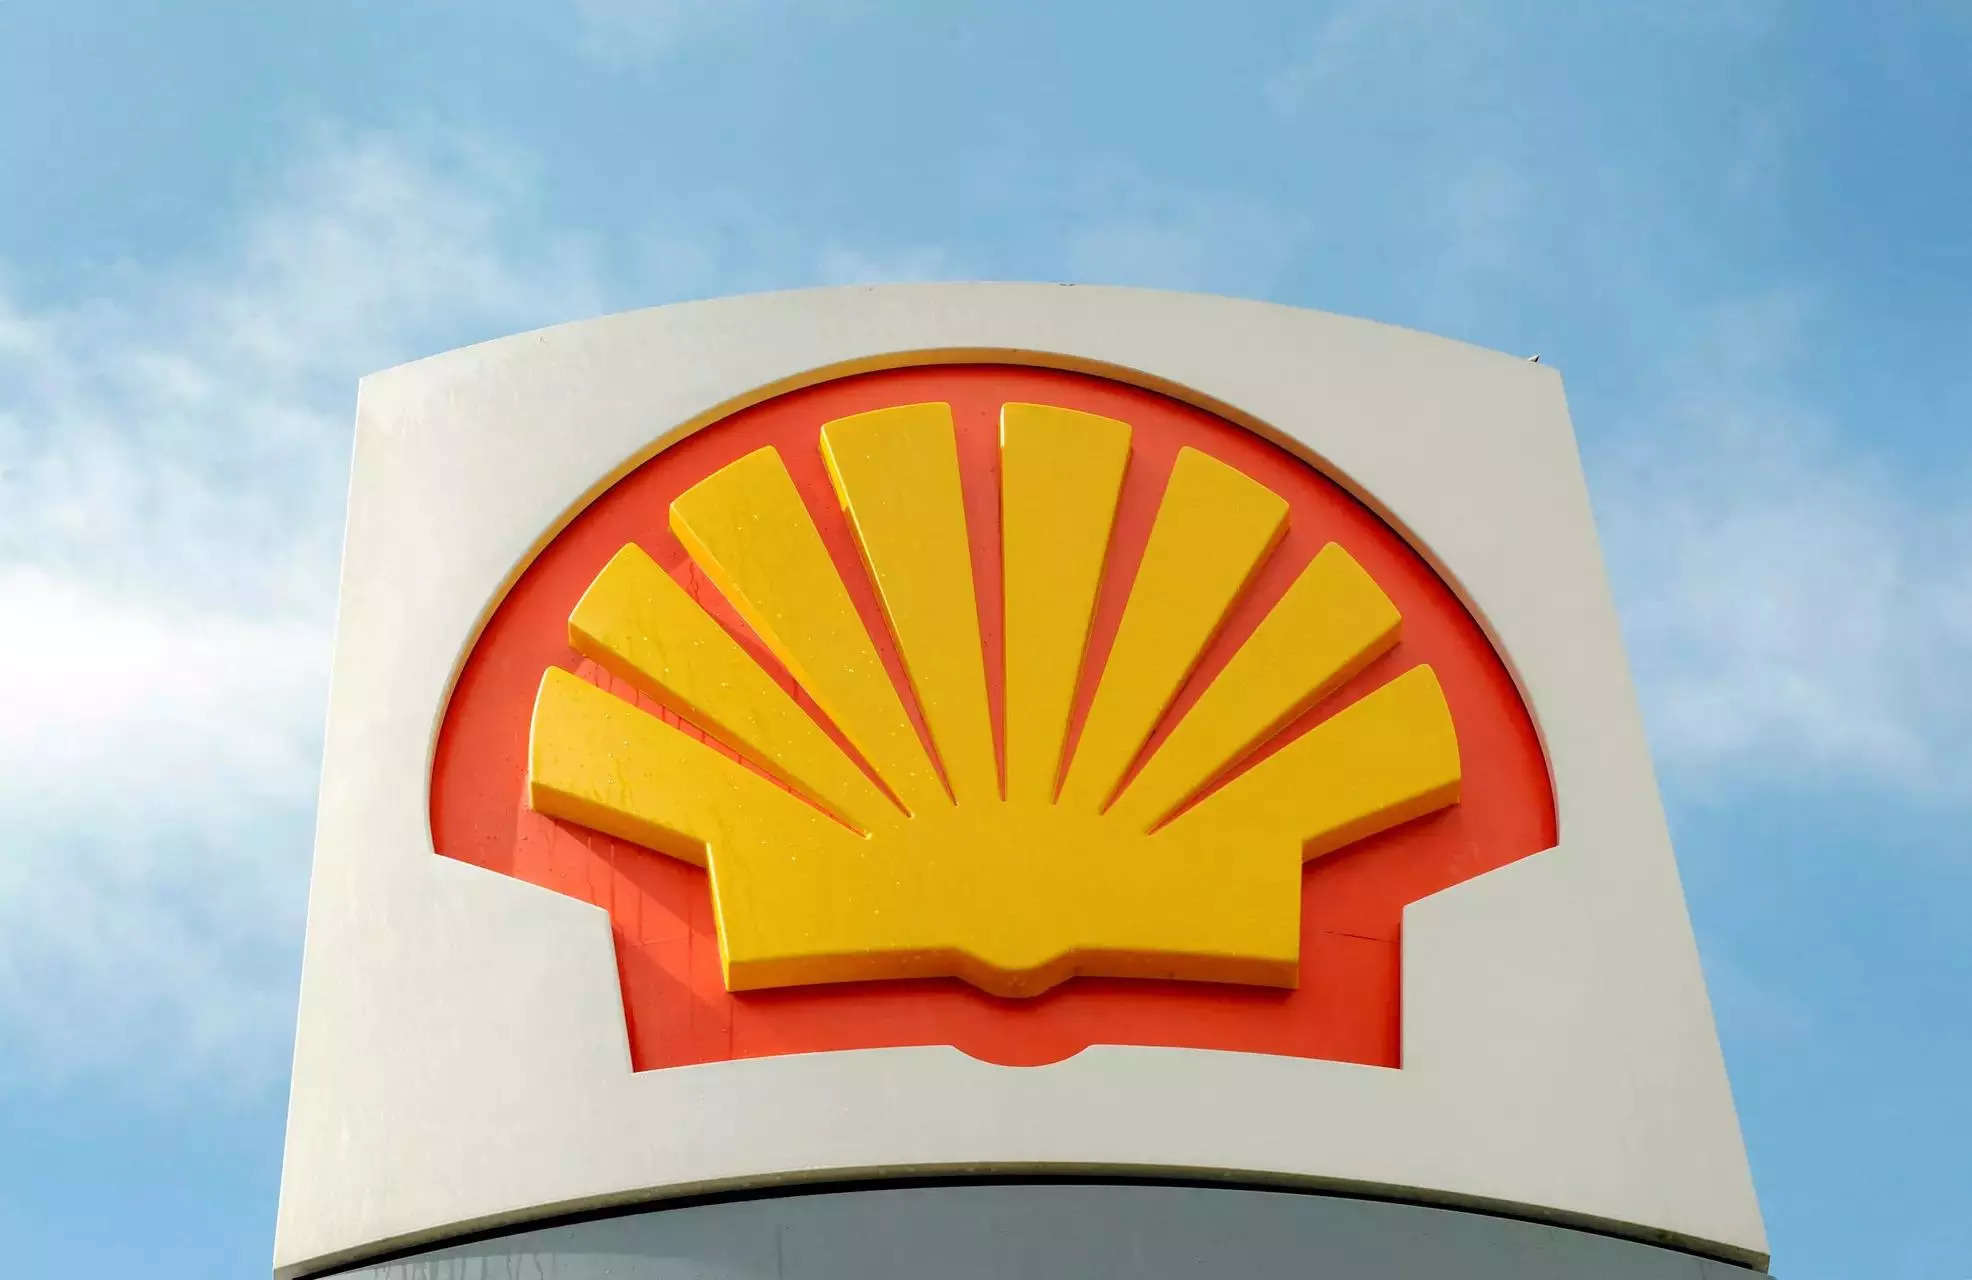 Shell says net profit sank 15.5% to $7.4 billion in first quarter